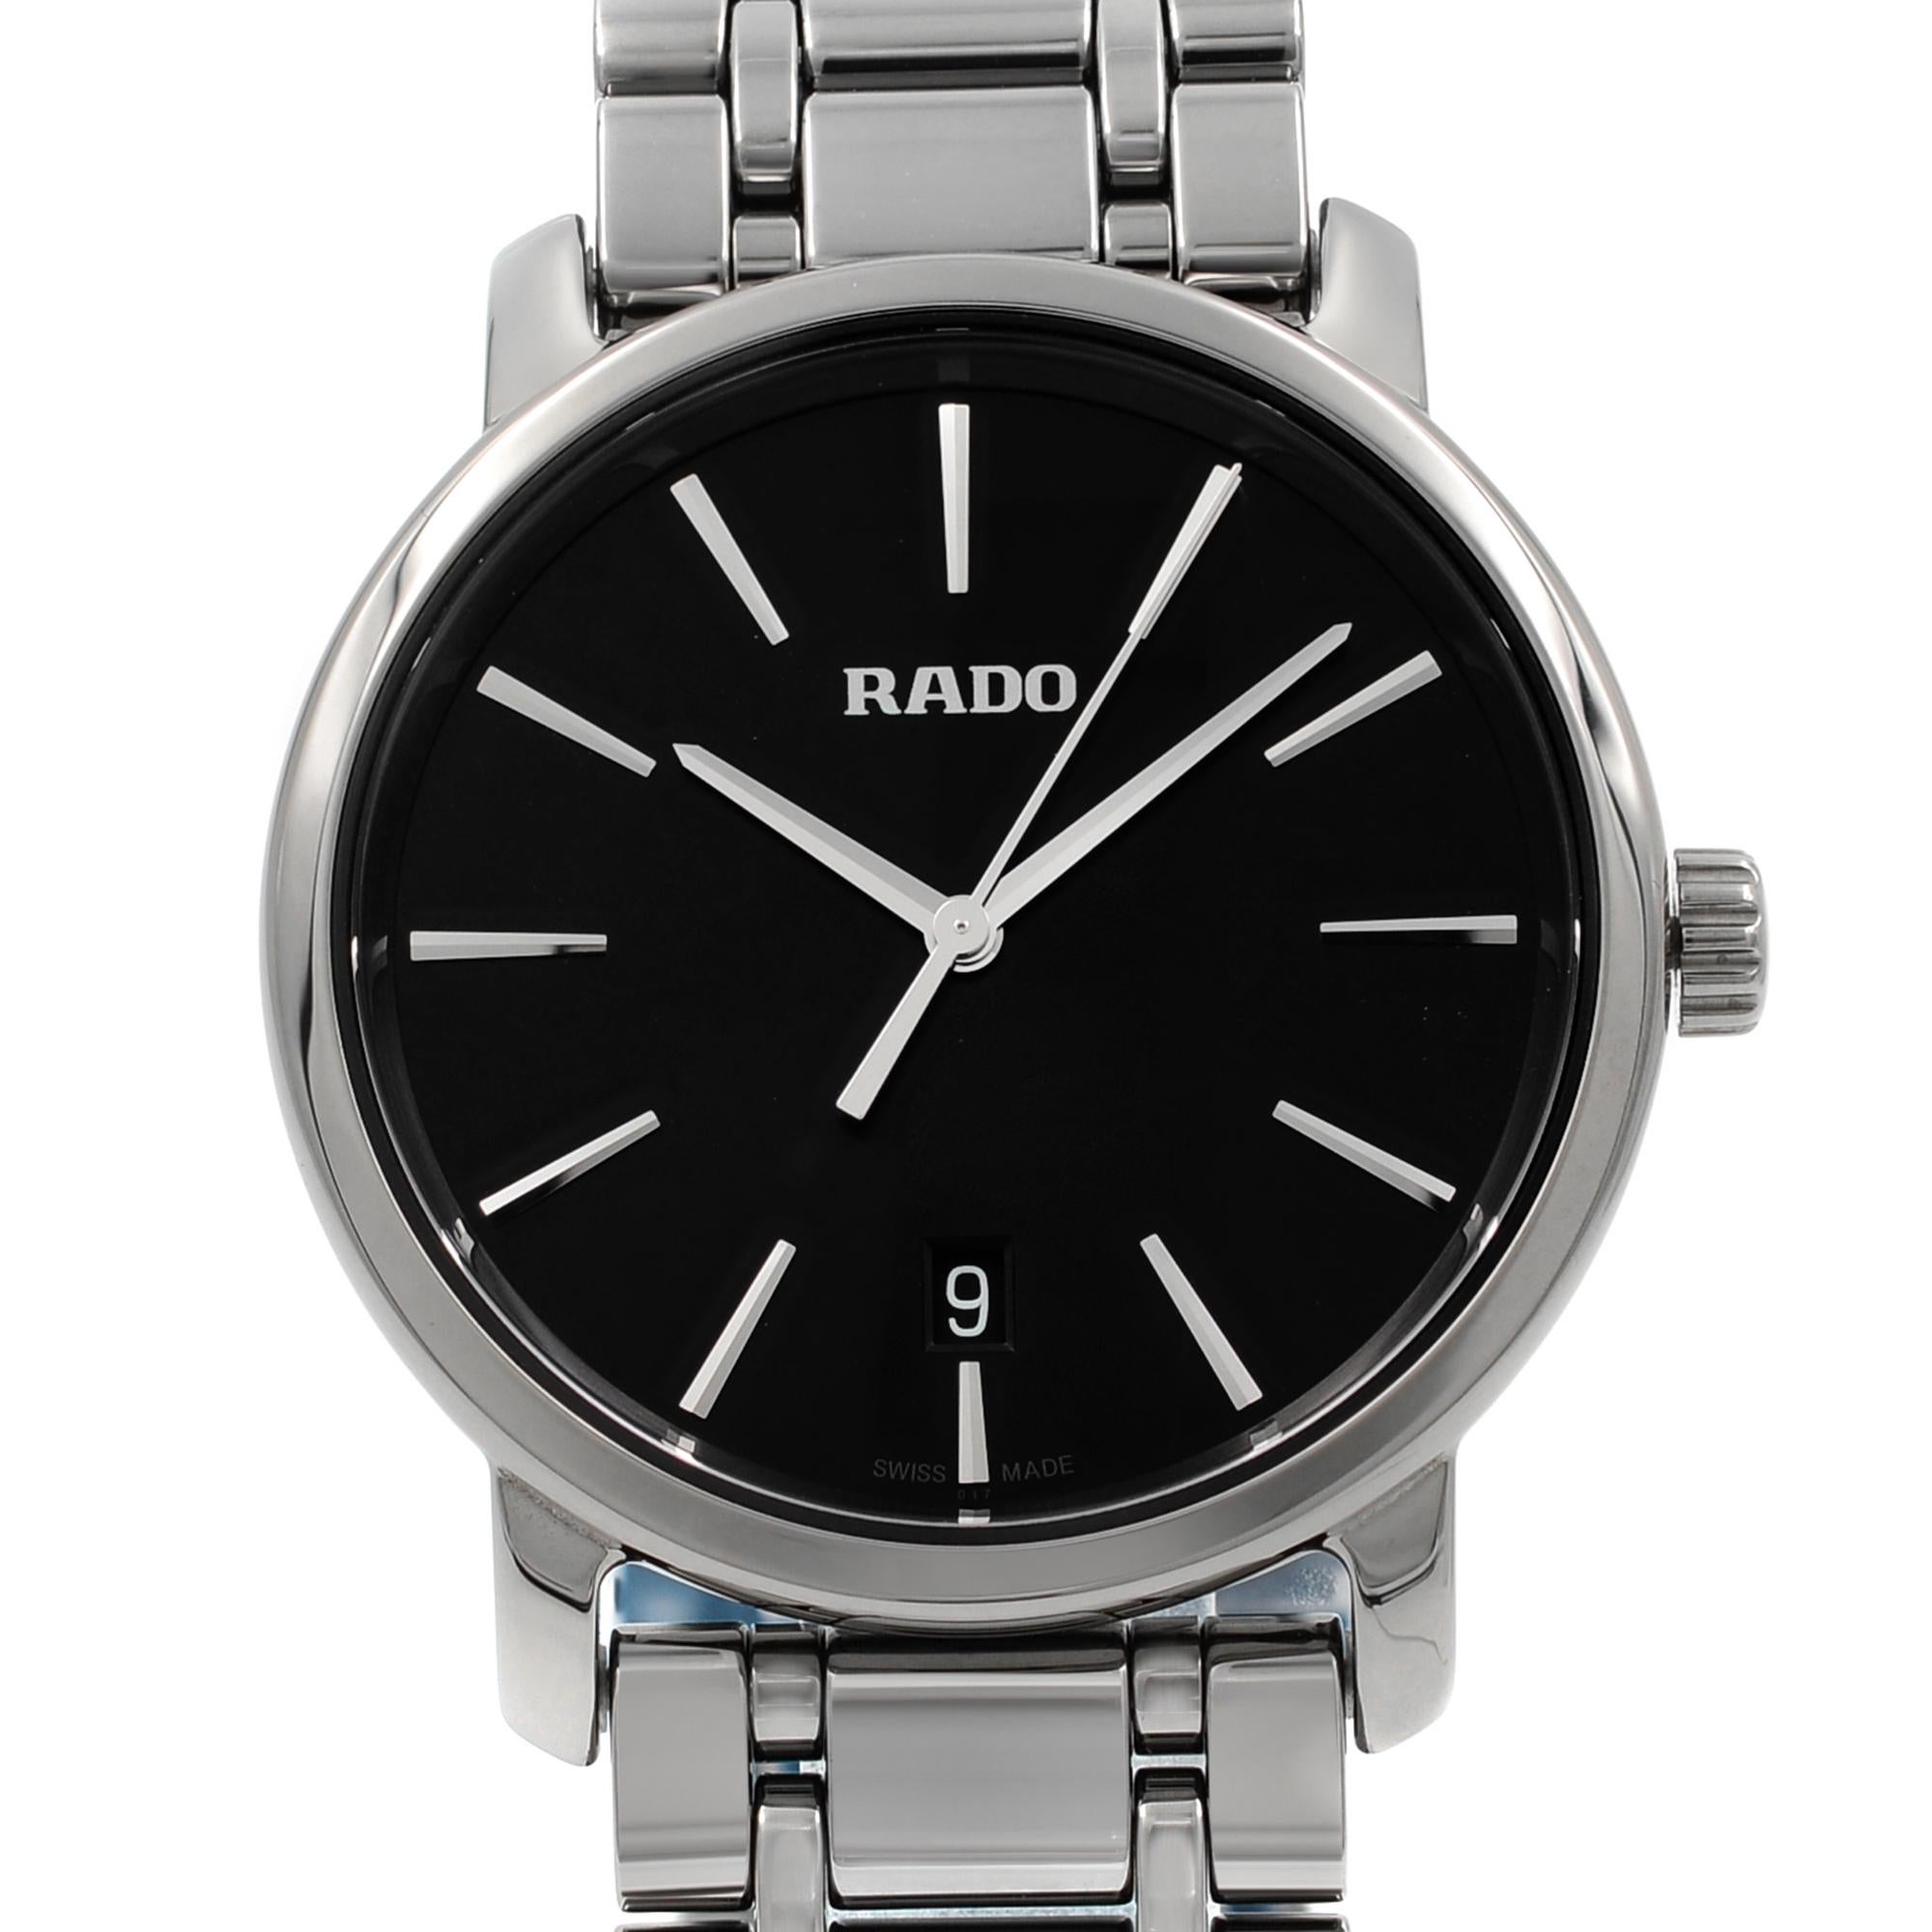 Unworn Rado Diamaster R14072177 is a beautiful men's timepiece that is powered by quartz (battery) movement which is cased in a ceramic case. It has a round shape face, a date indicator dial, and has hand sticks style markers. It is completed with a